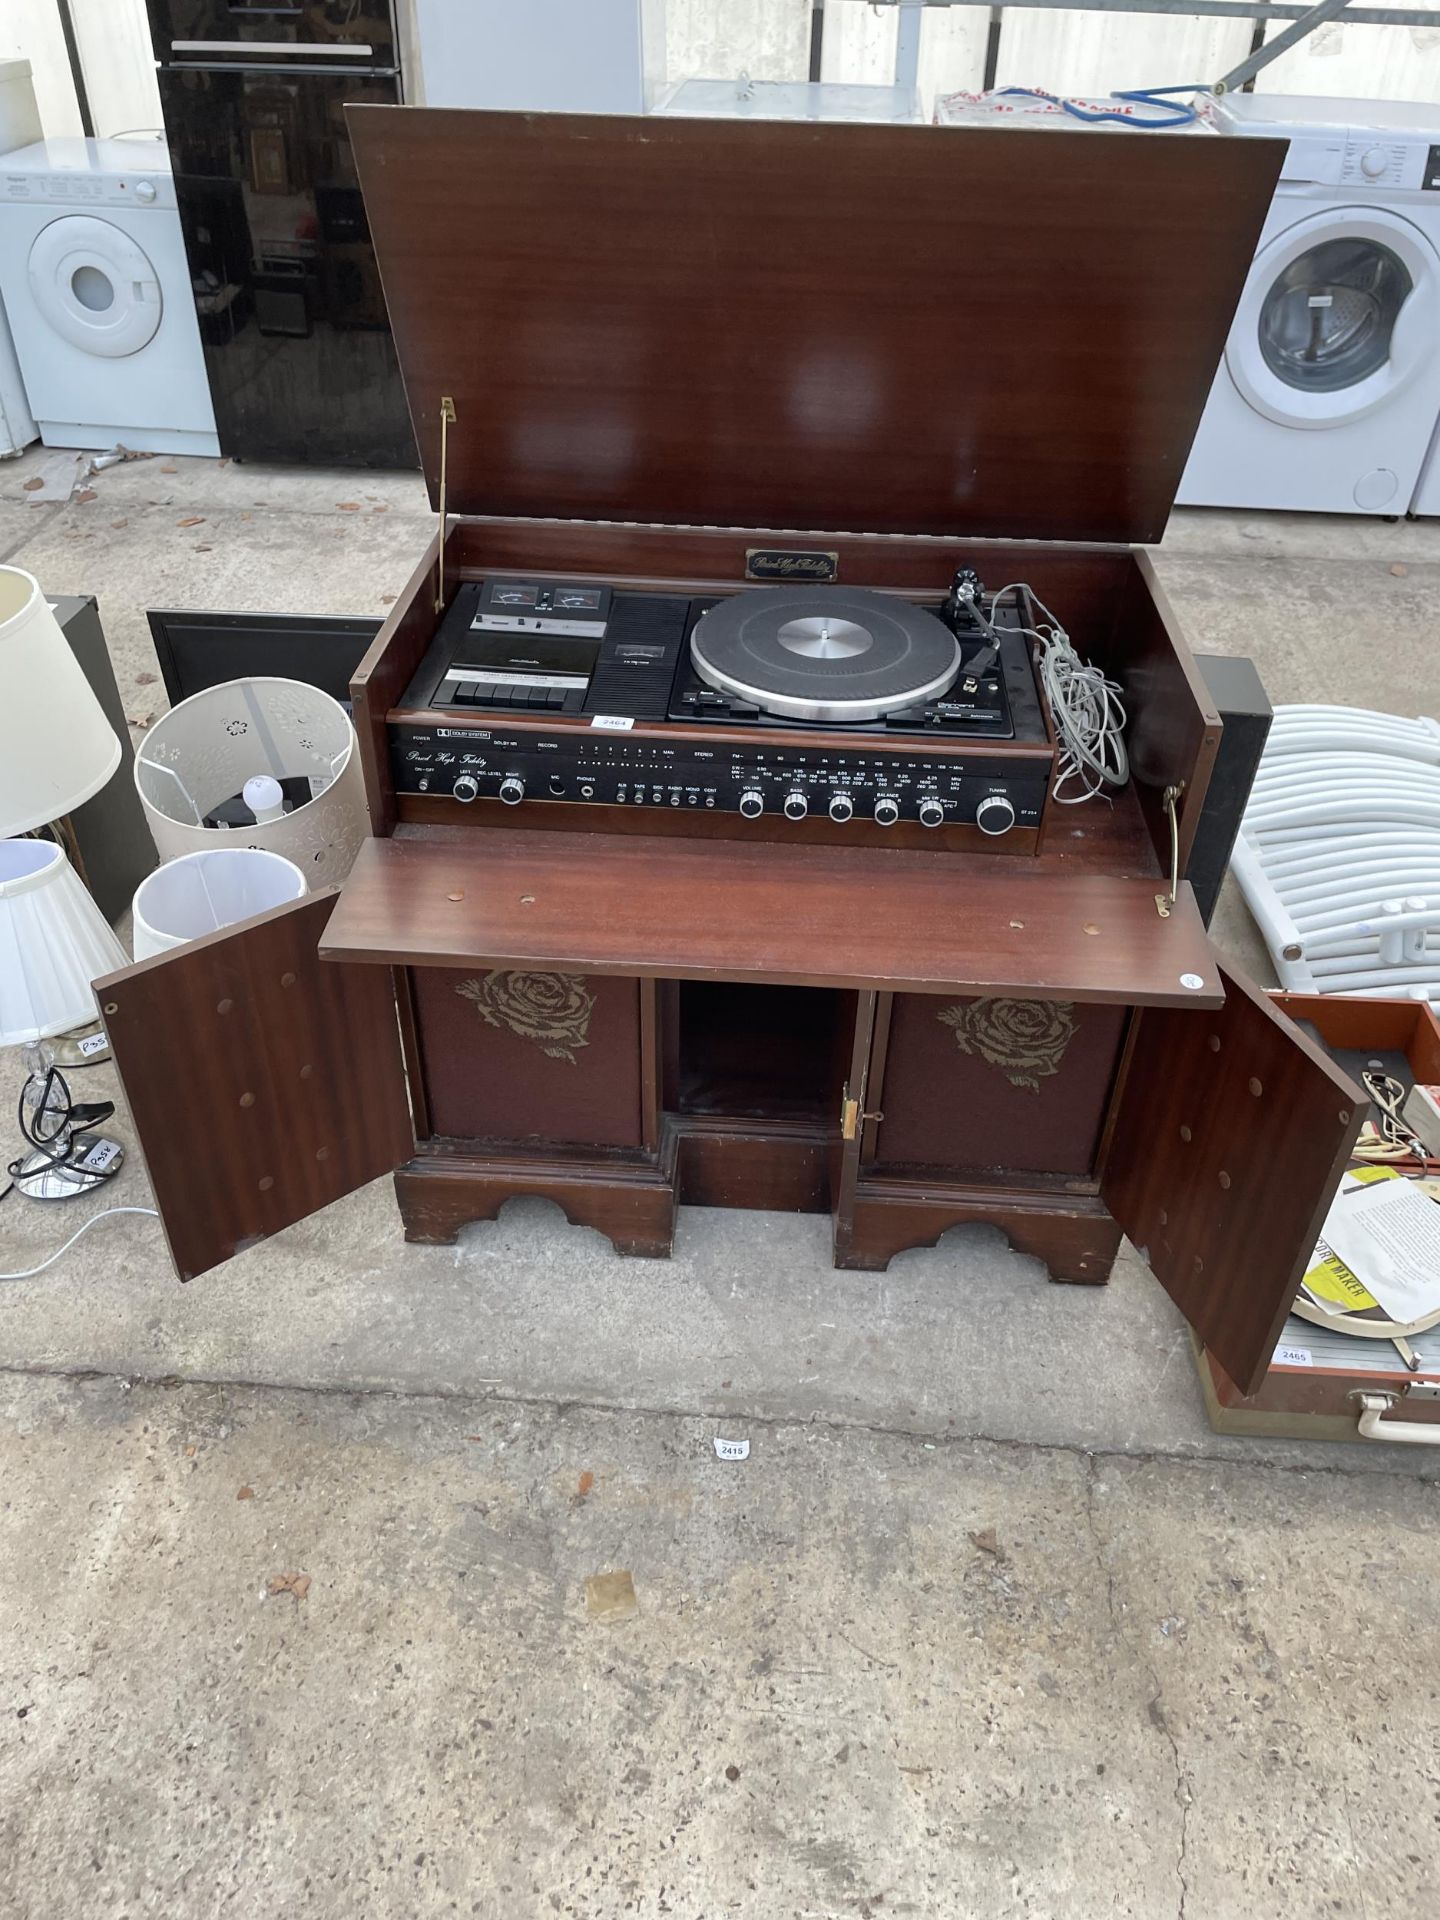 A WOODEN STEREO CABINET WITH SPEAKERS AND A GARRARD RECORD DECK